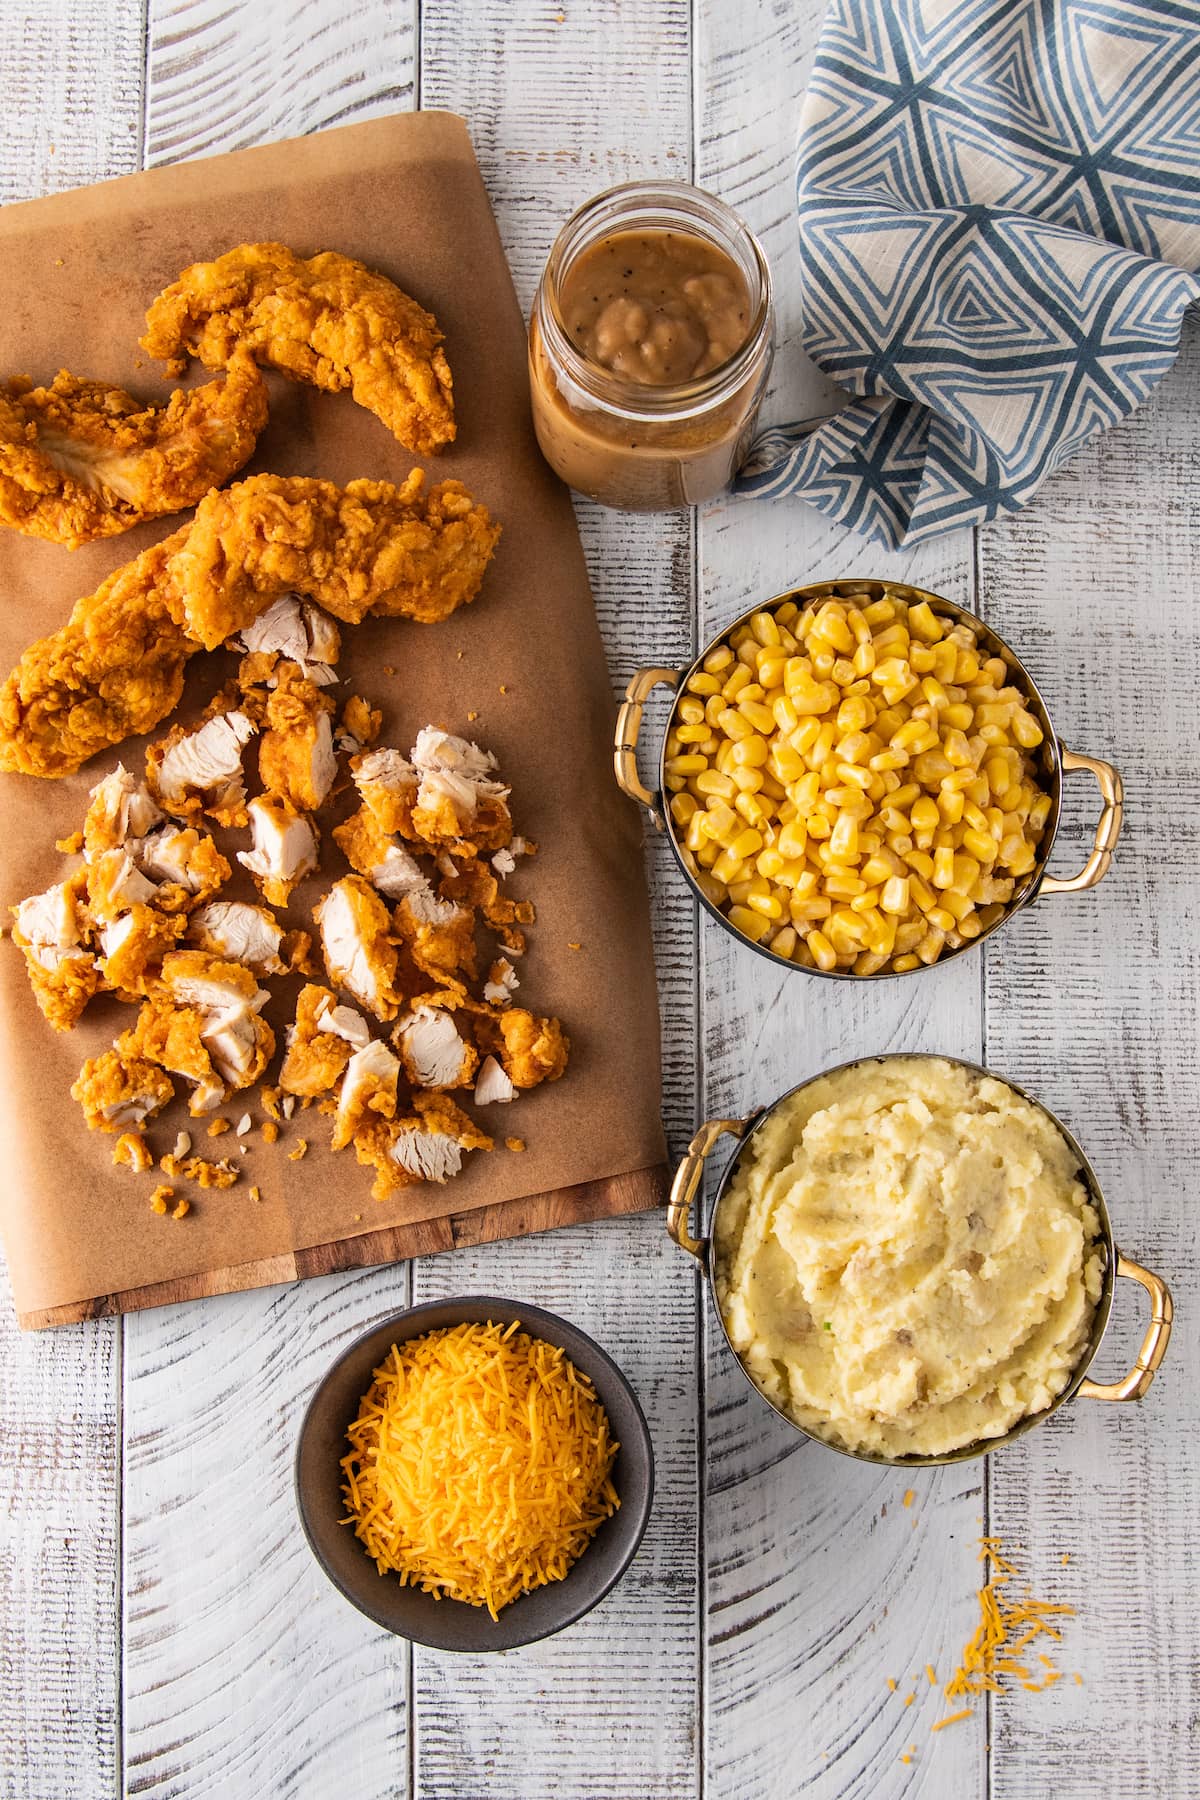 the ingredients to make a fried chicken casserole dish based off of the KFC Bowl, there's corn, mashed potatoes, cheese, gravy, and fried chicken chopped on a cutting board